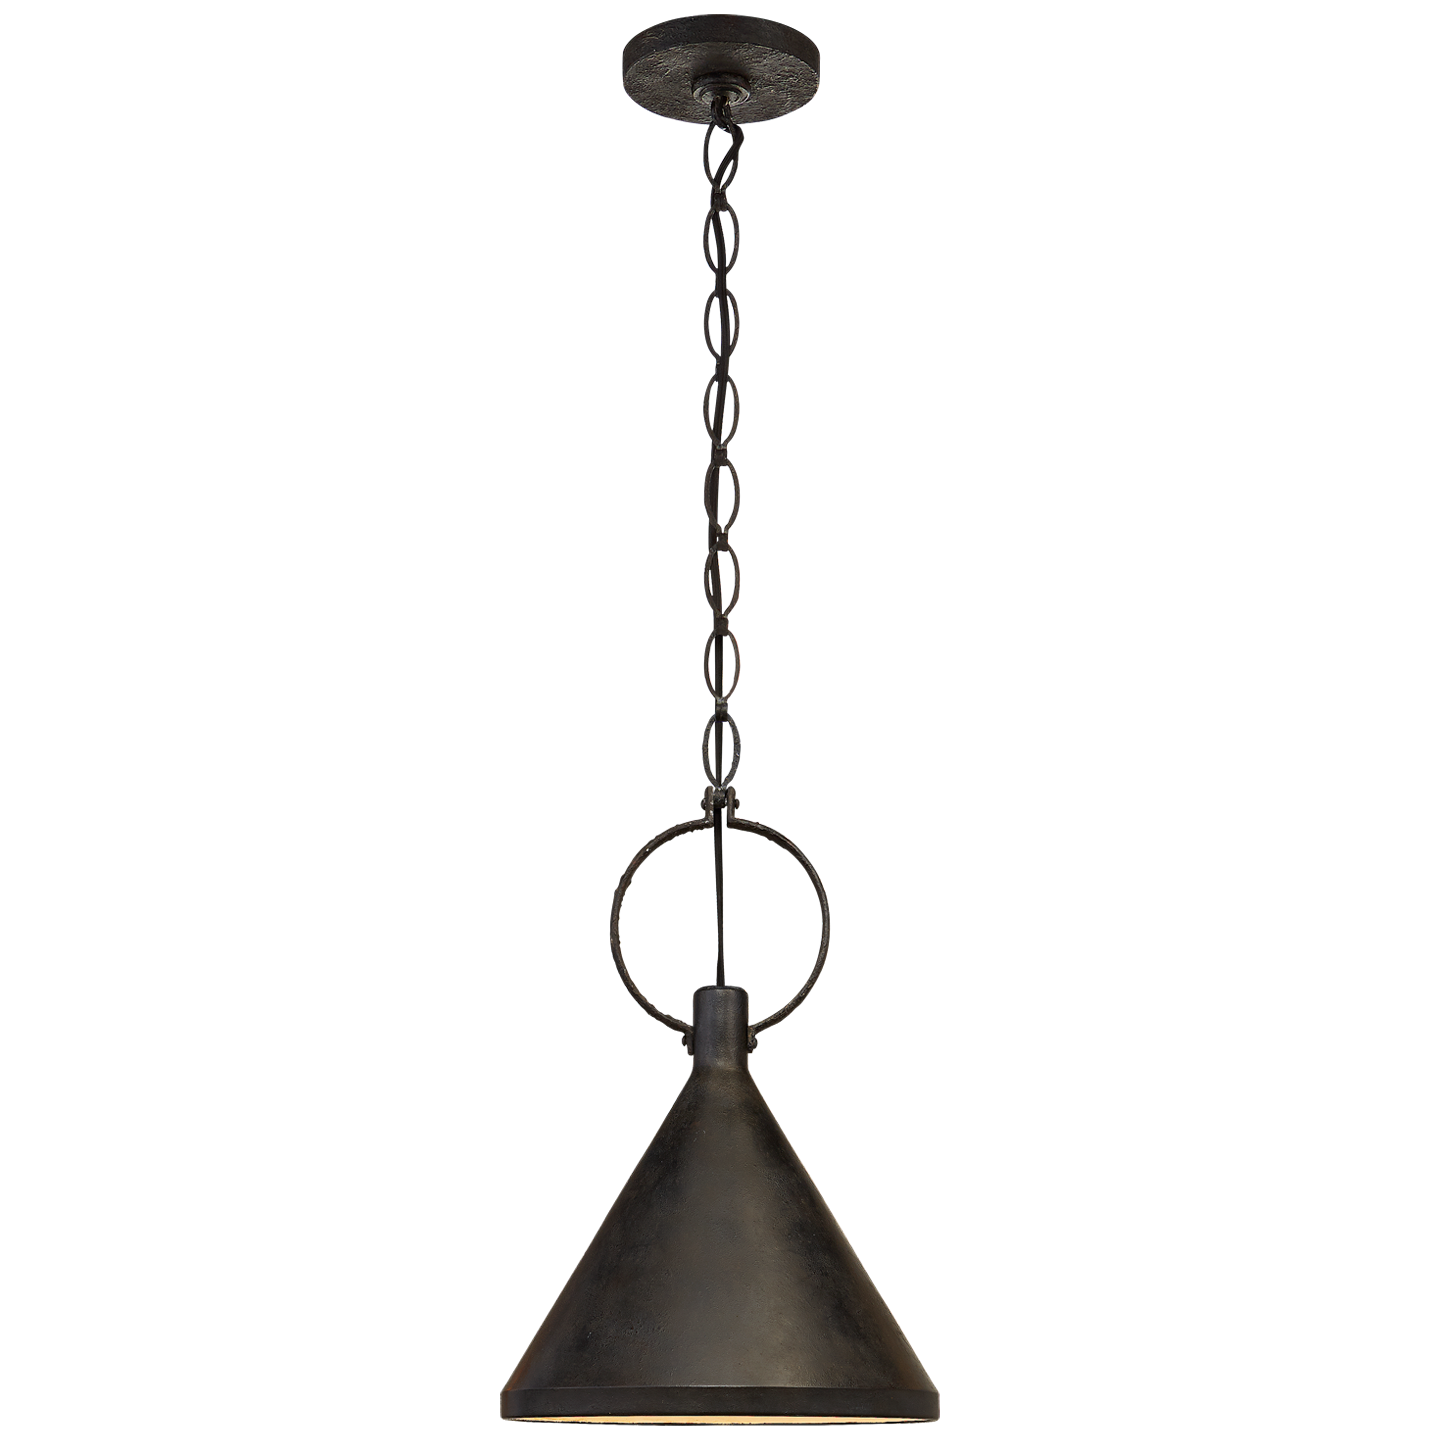 We love the shade and natural rusted iron finish of this Limoges Medium Pendant by Visual Comfort. This would look gorgeous over a kitchen island, kitchen sink, or other area needing extra light.   Designer: Suzanne Kasler  Fixture Height: 20.5" Width: 14.25" Canopy: 5.5" Round Socket: E26 Keyless Wattage: 60 A